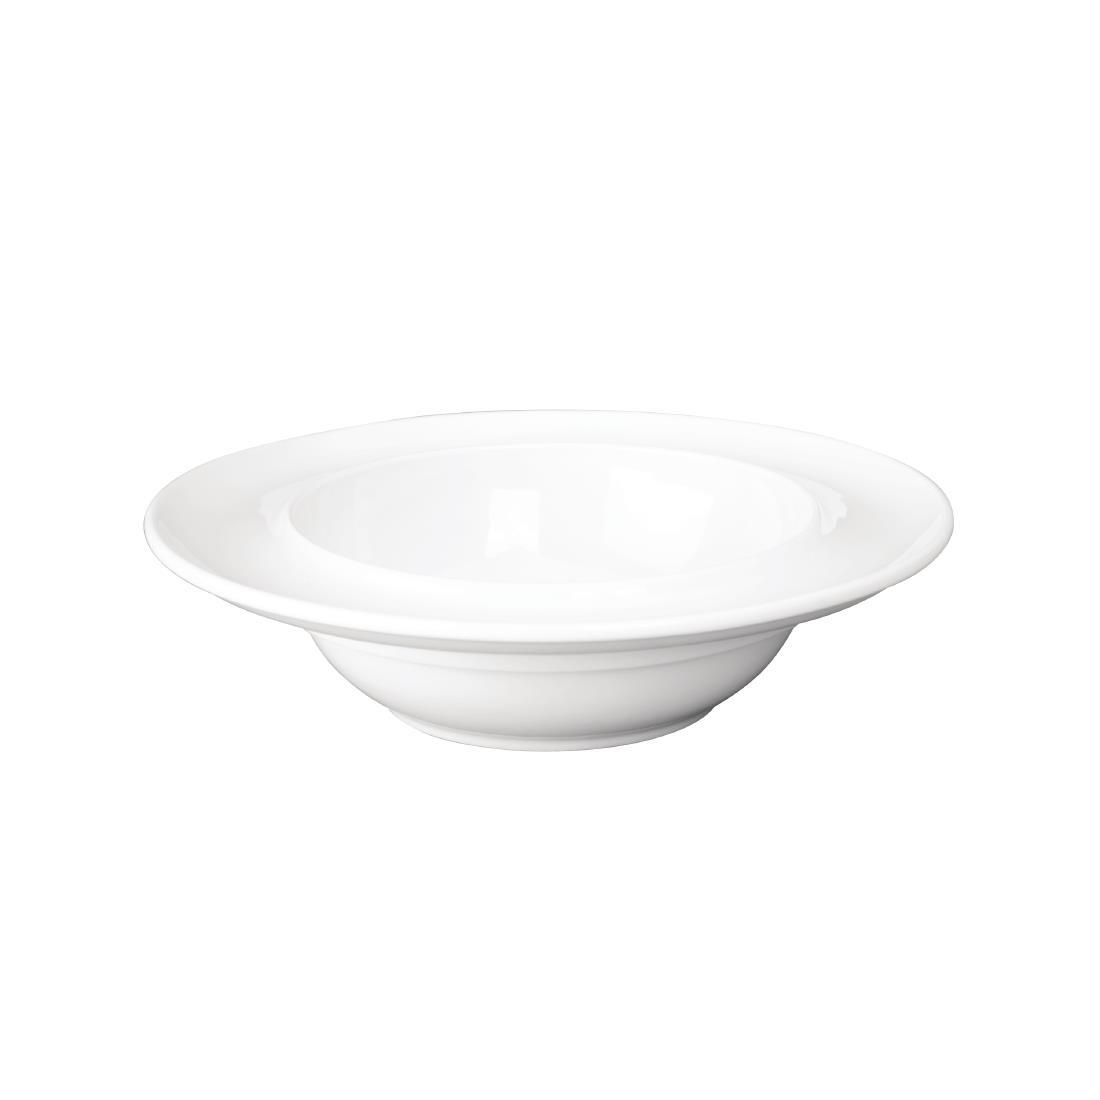 Olympia Heritage Raised Rim Bowls 205mm White (Pack of 4) - DW154  - 2